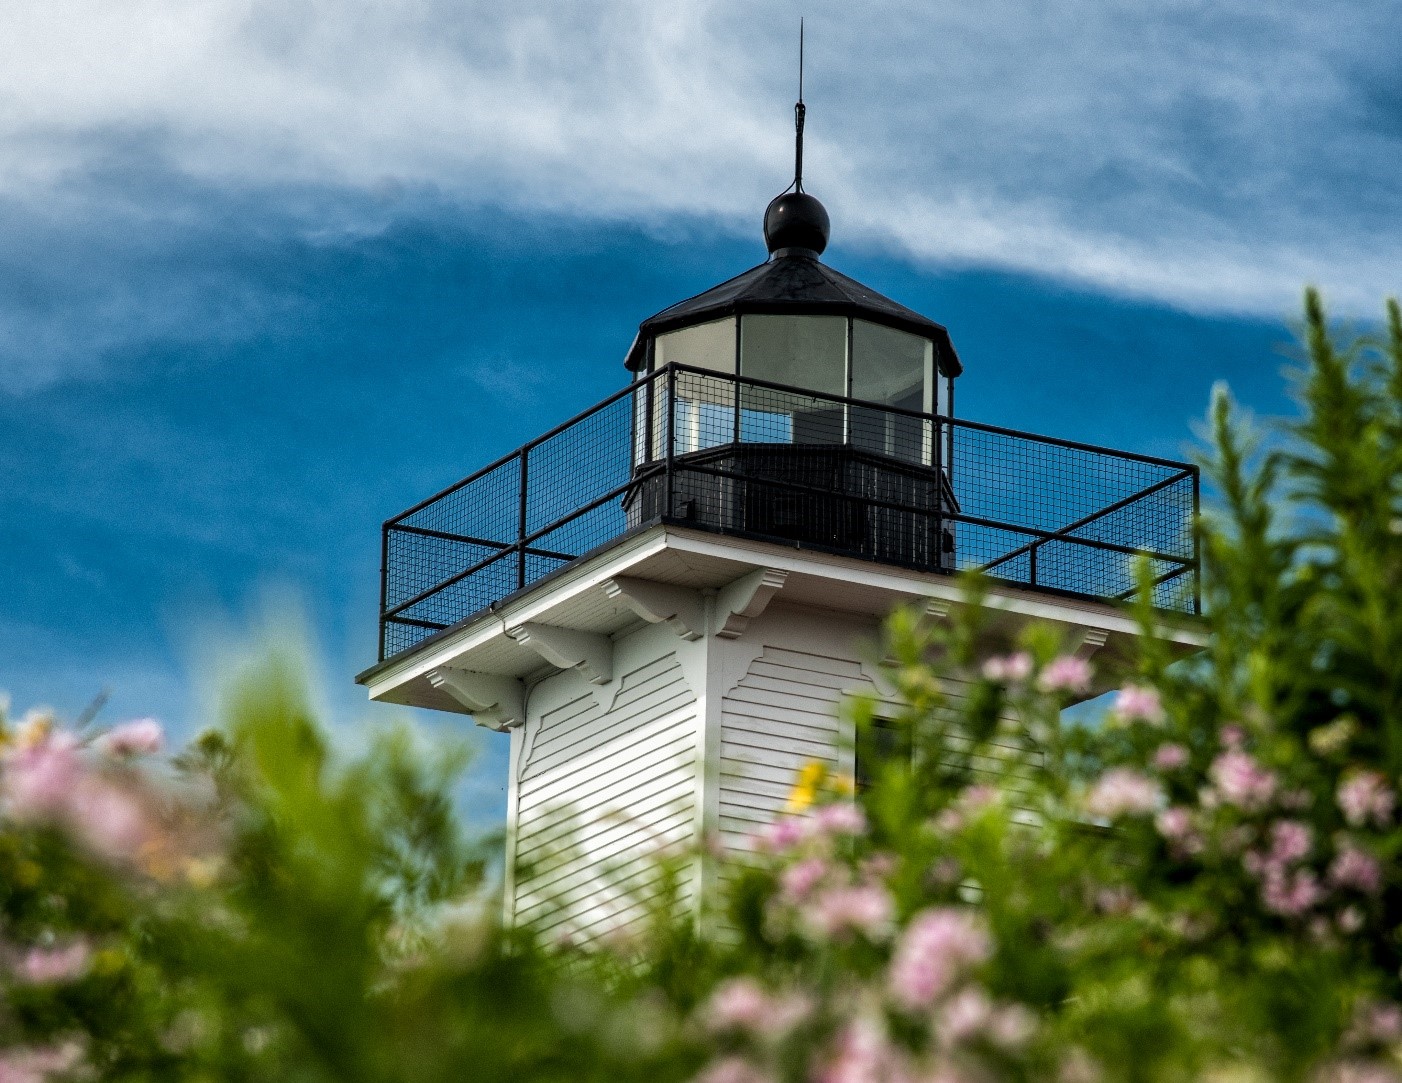 Pink flowers in front of a white lighthouse with a black balcony.